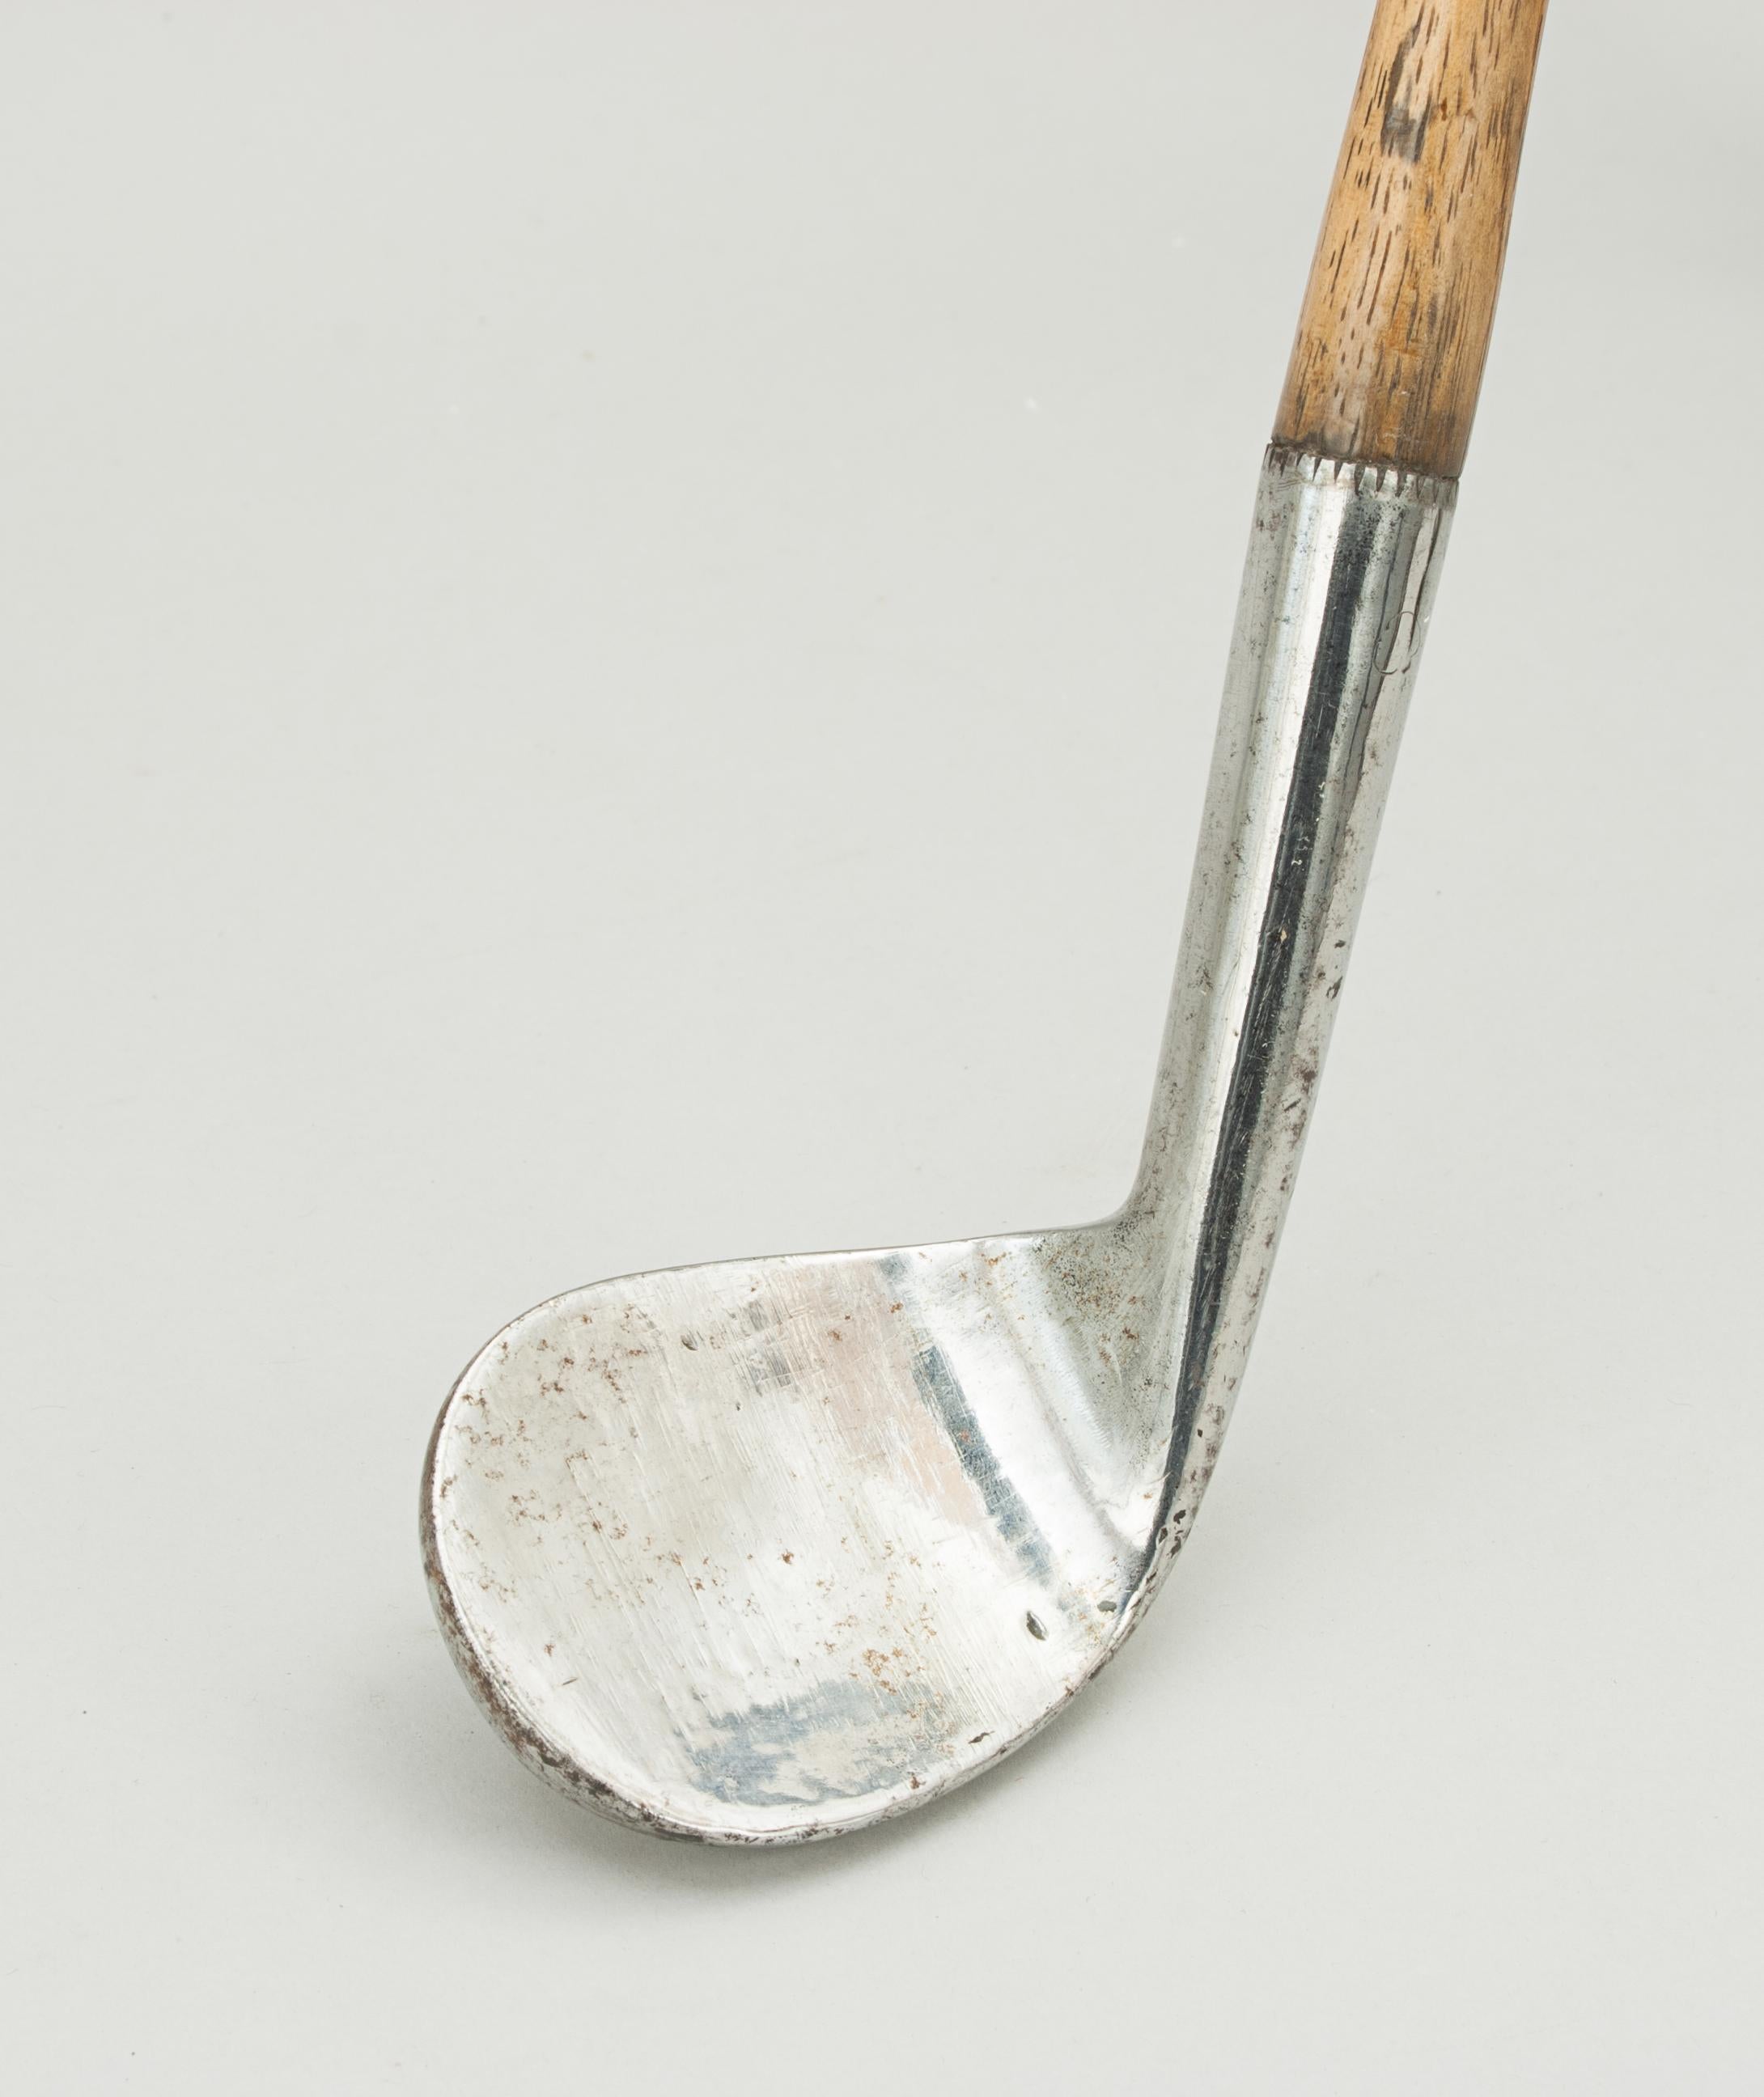 Spalding rut niblick.
A good quality, smooth and dished faced, rut niblick golf club with hickory shaft. The head stamped on the back 'Crescent' hand-forged with the Spalding logo (cleek mark). A nice desirable golf collectible. The club head has